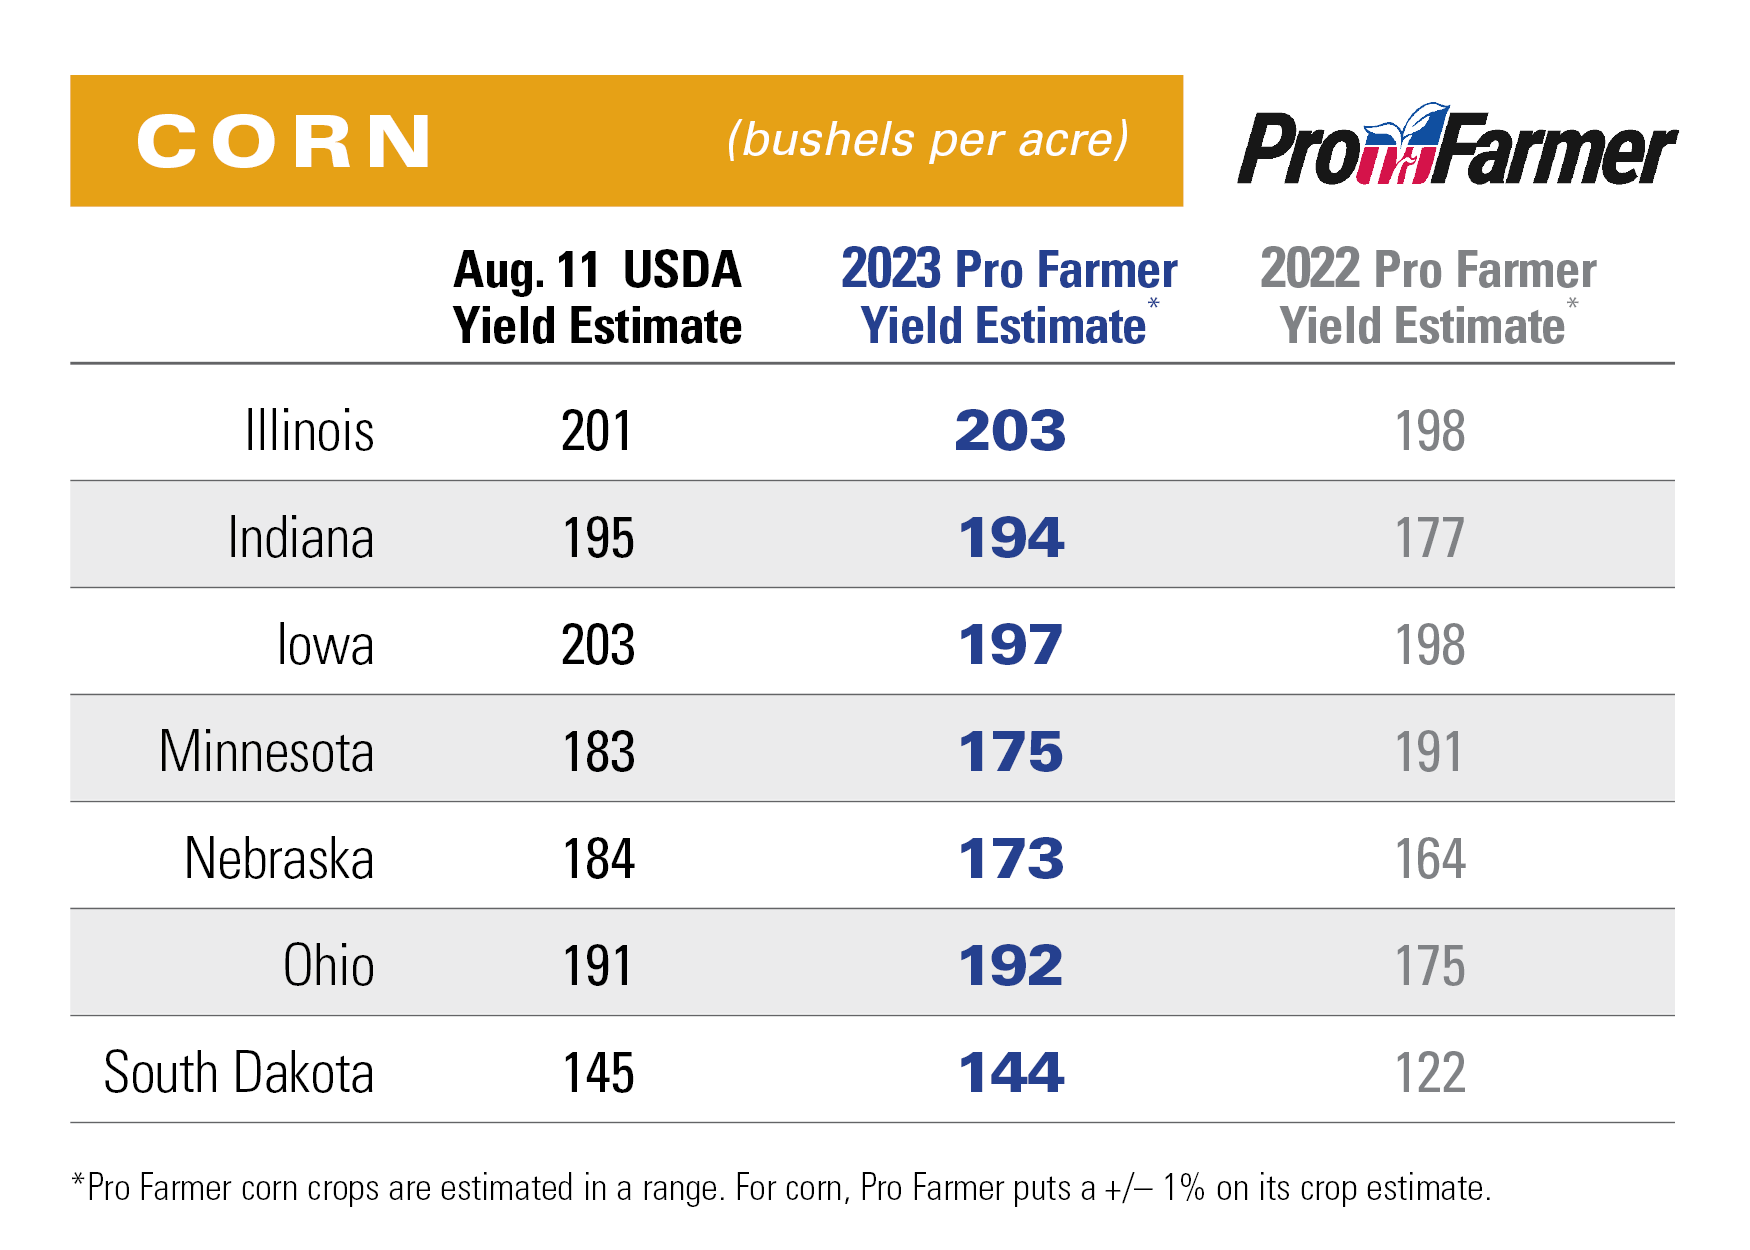 Here's How Pro Farmer's 2023 Yield Estimates Stack Up to USDA Expectations